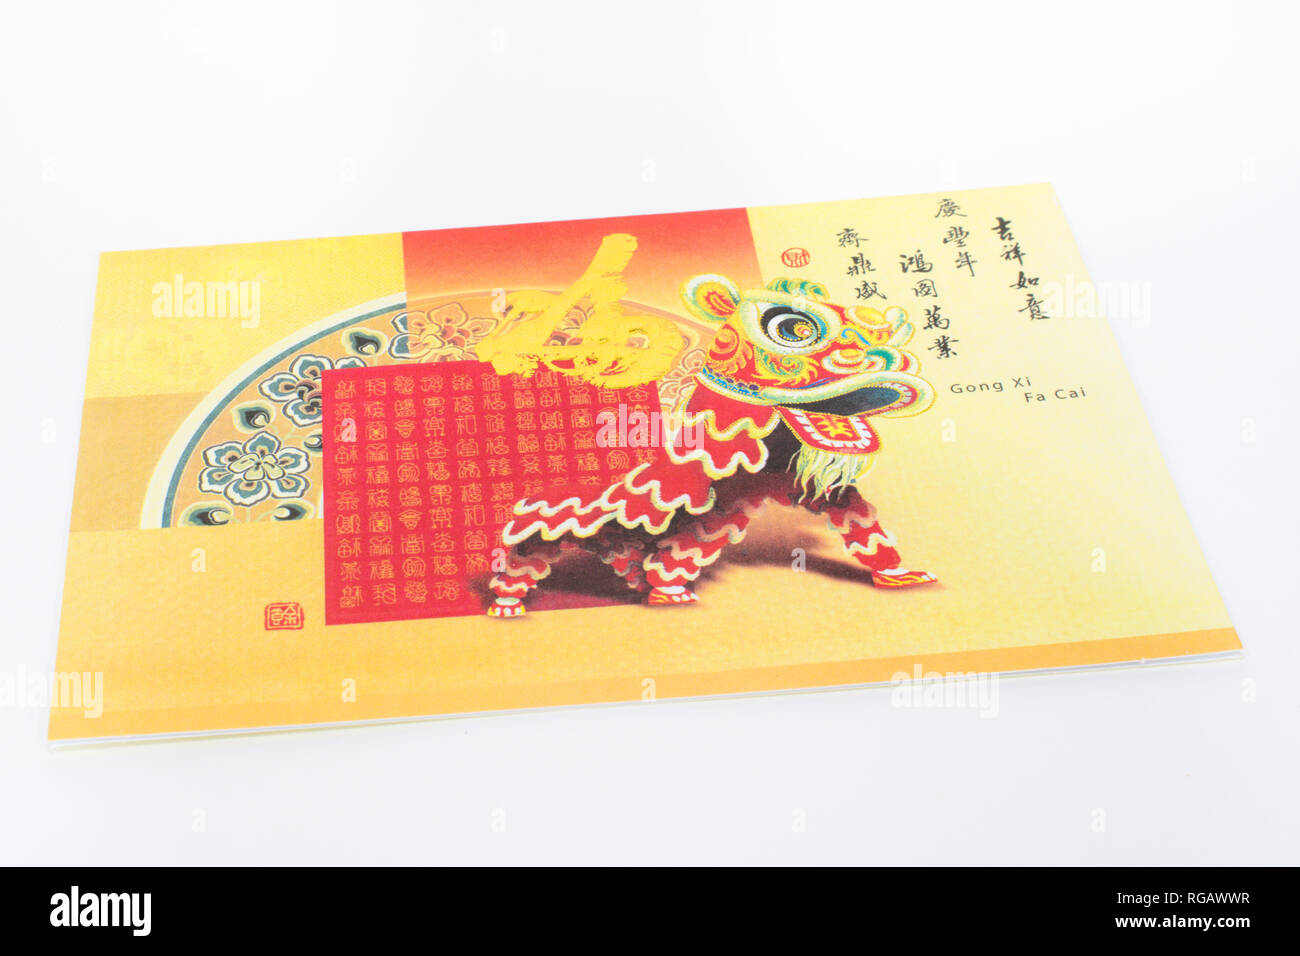 7.1, Greeting Card, IndonesianBook Stock Photo